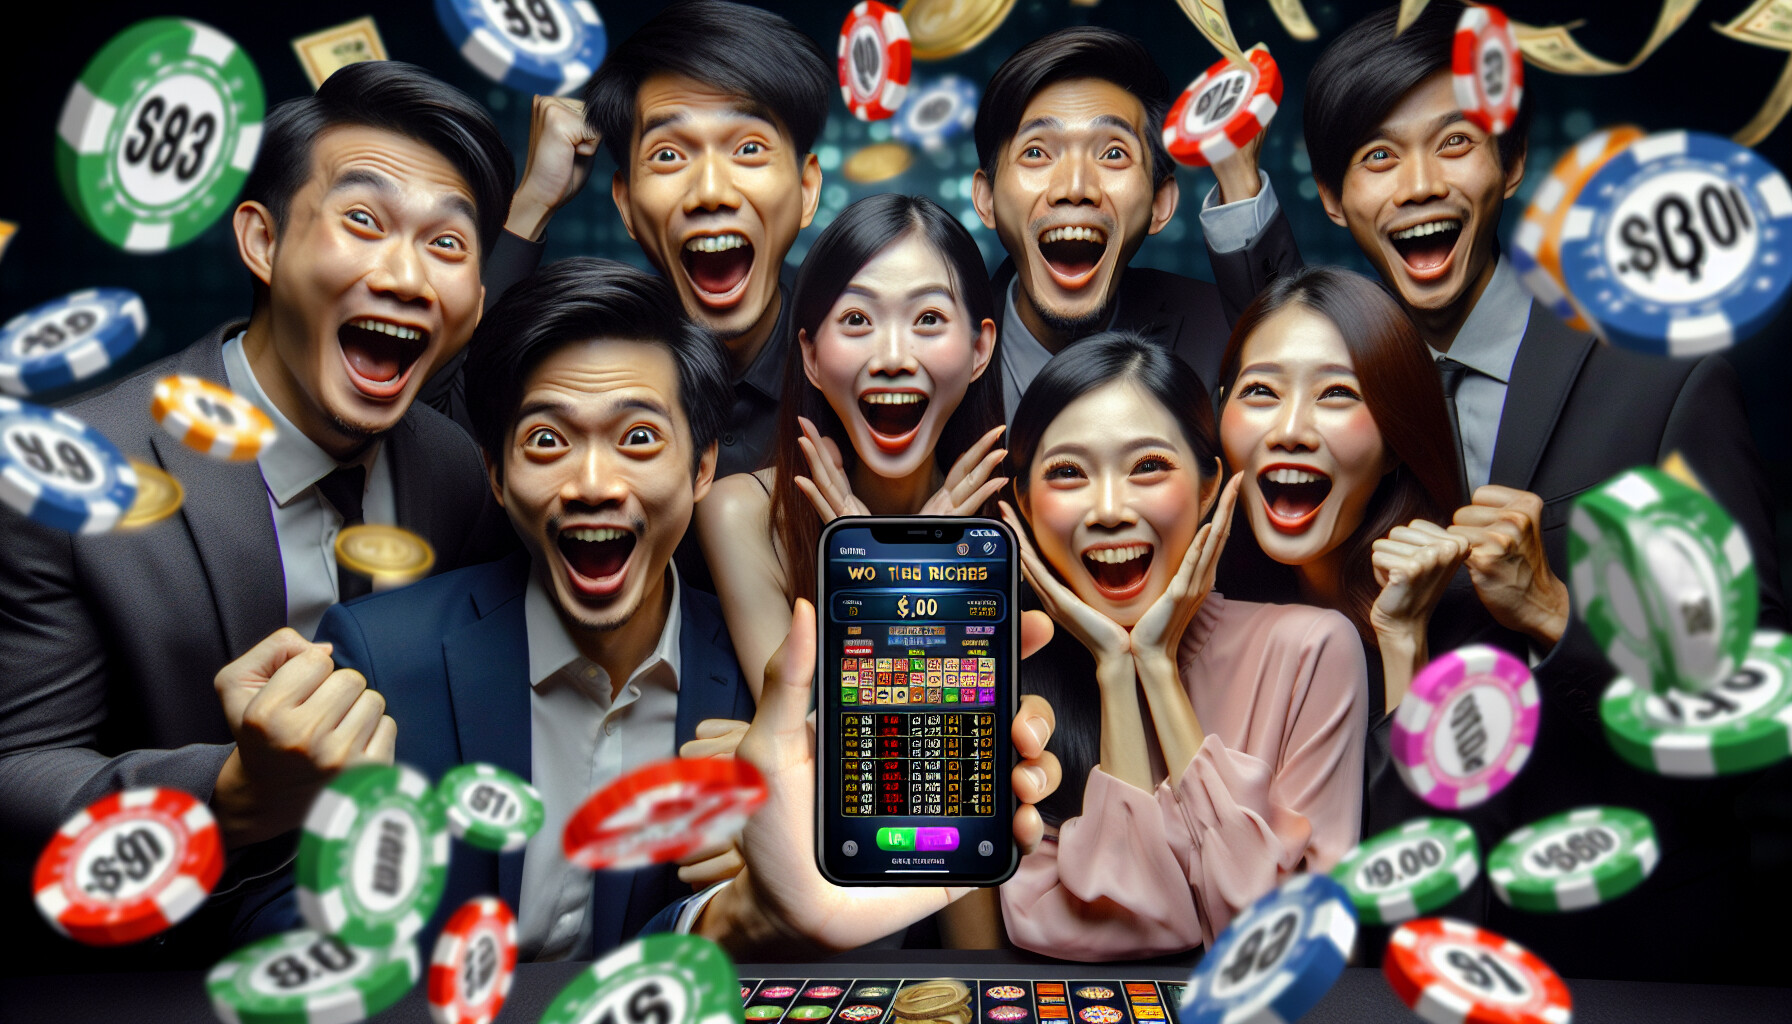 🎰 Spin your way to fortune with Rollex11! Read how I transformed MYR 200 into MYR 1,000 - a winning journey you won't want to miss! 💰💸 #Rollex11 #SlotGames #BigWins